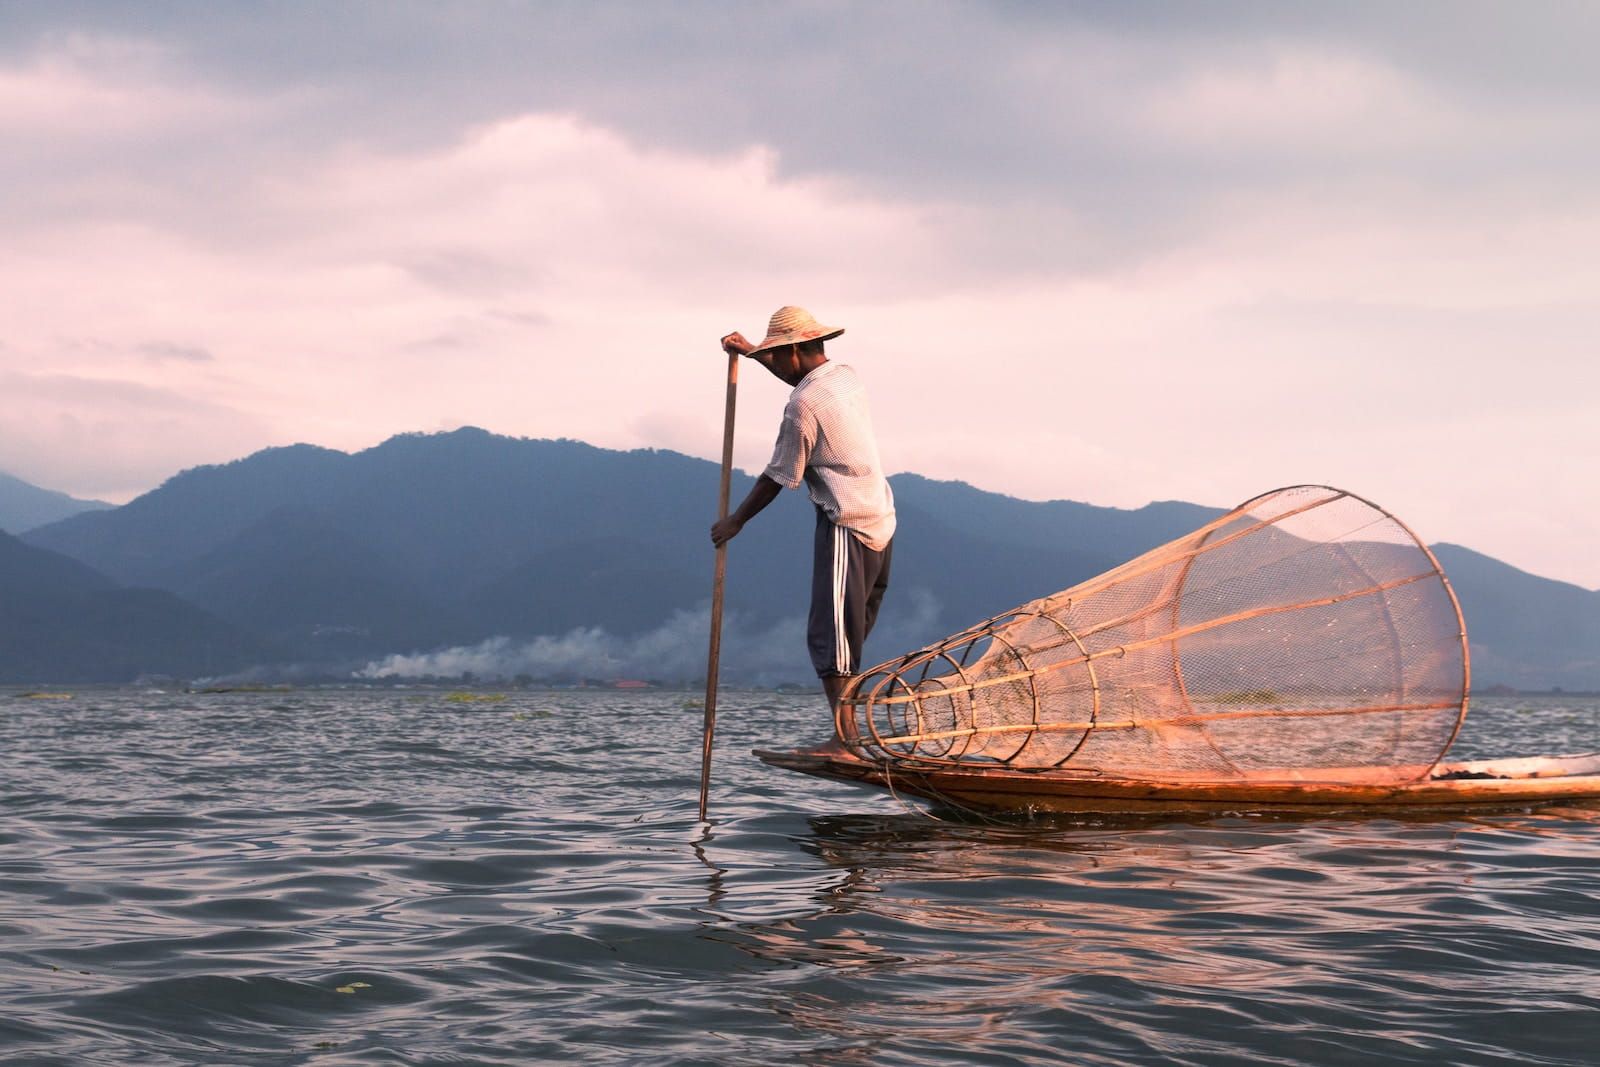 The Story of the Mexican Fisherman